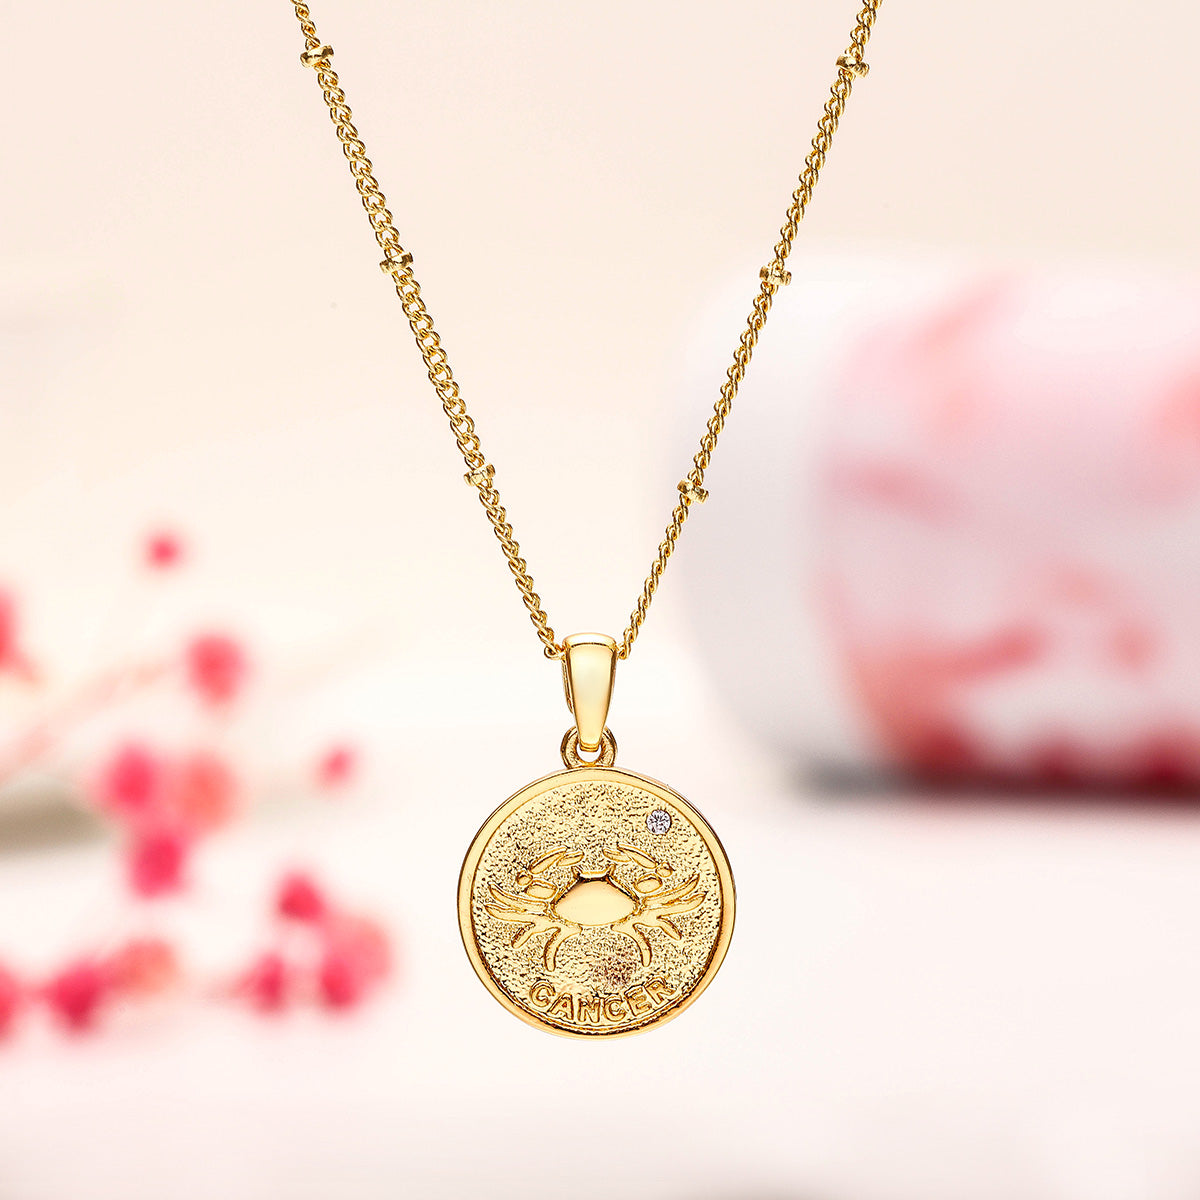 Cancer Constellation Coin Pendant Vintage Necklace